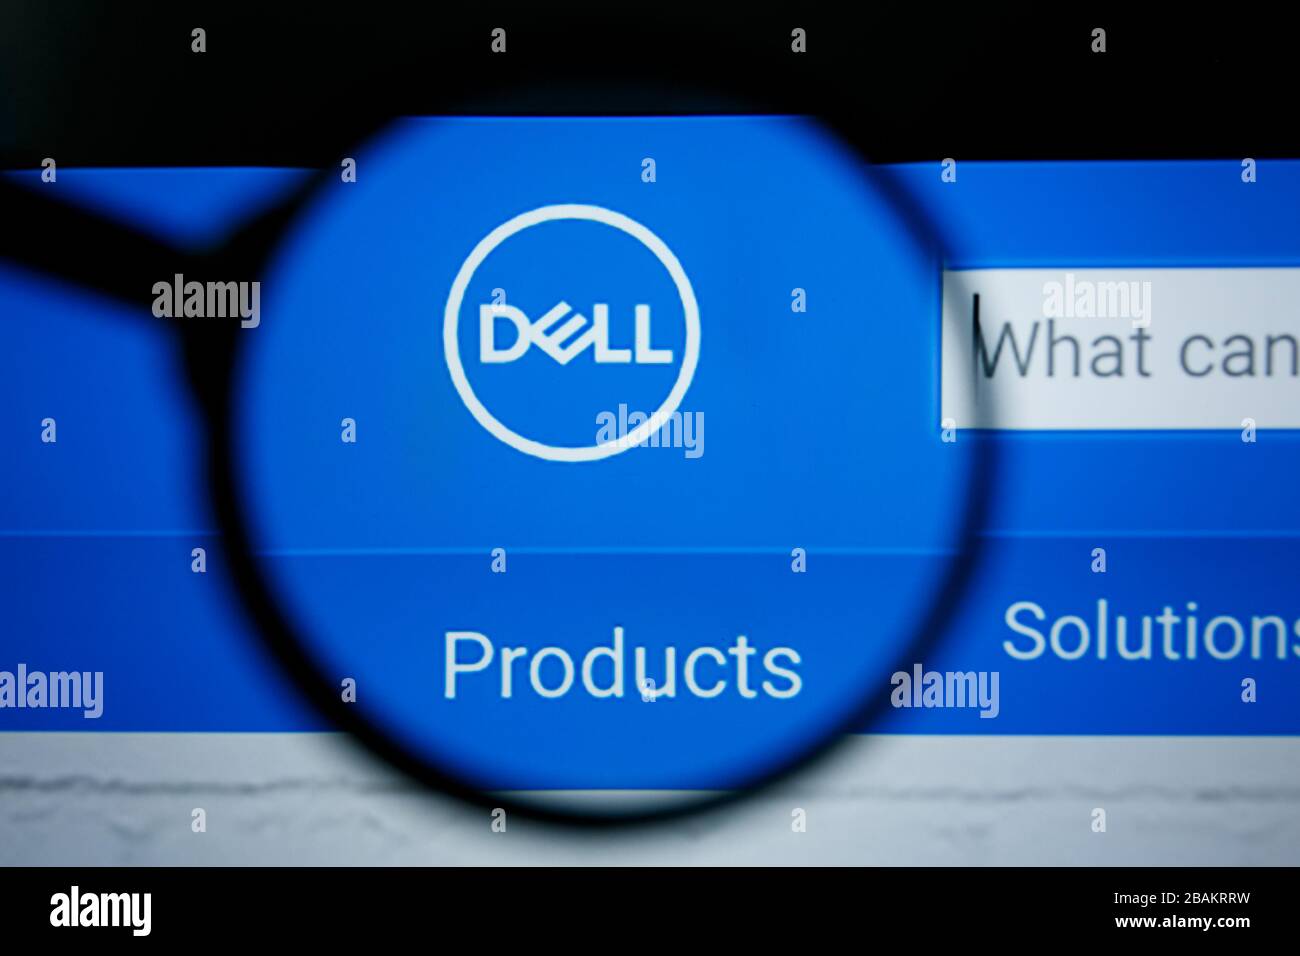 Los Angeles, California, USA - 25 June 2019: Illustrative Editorial of Dell website homepage. Dell logo visible on display screen Stock Photo